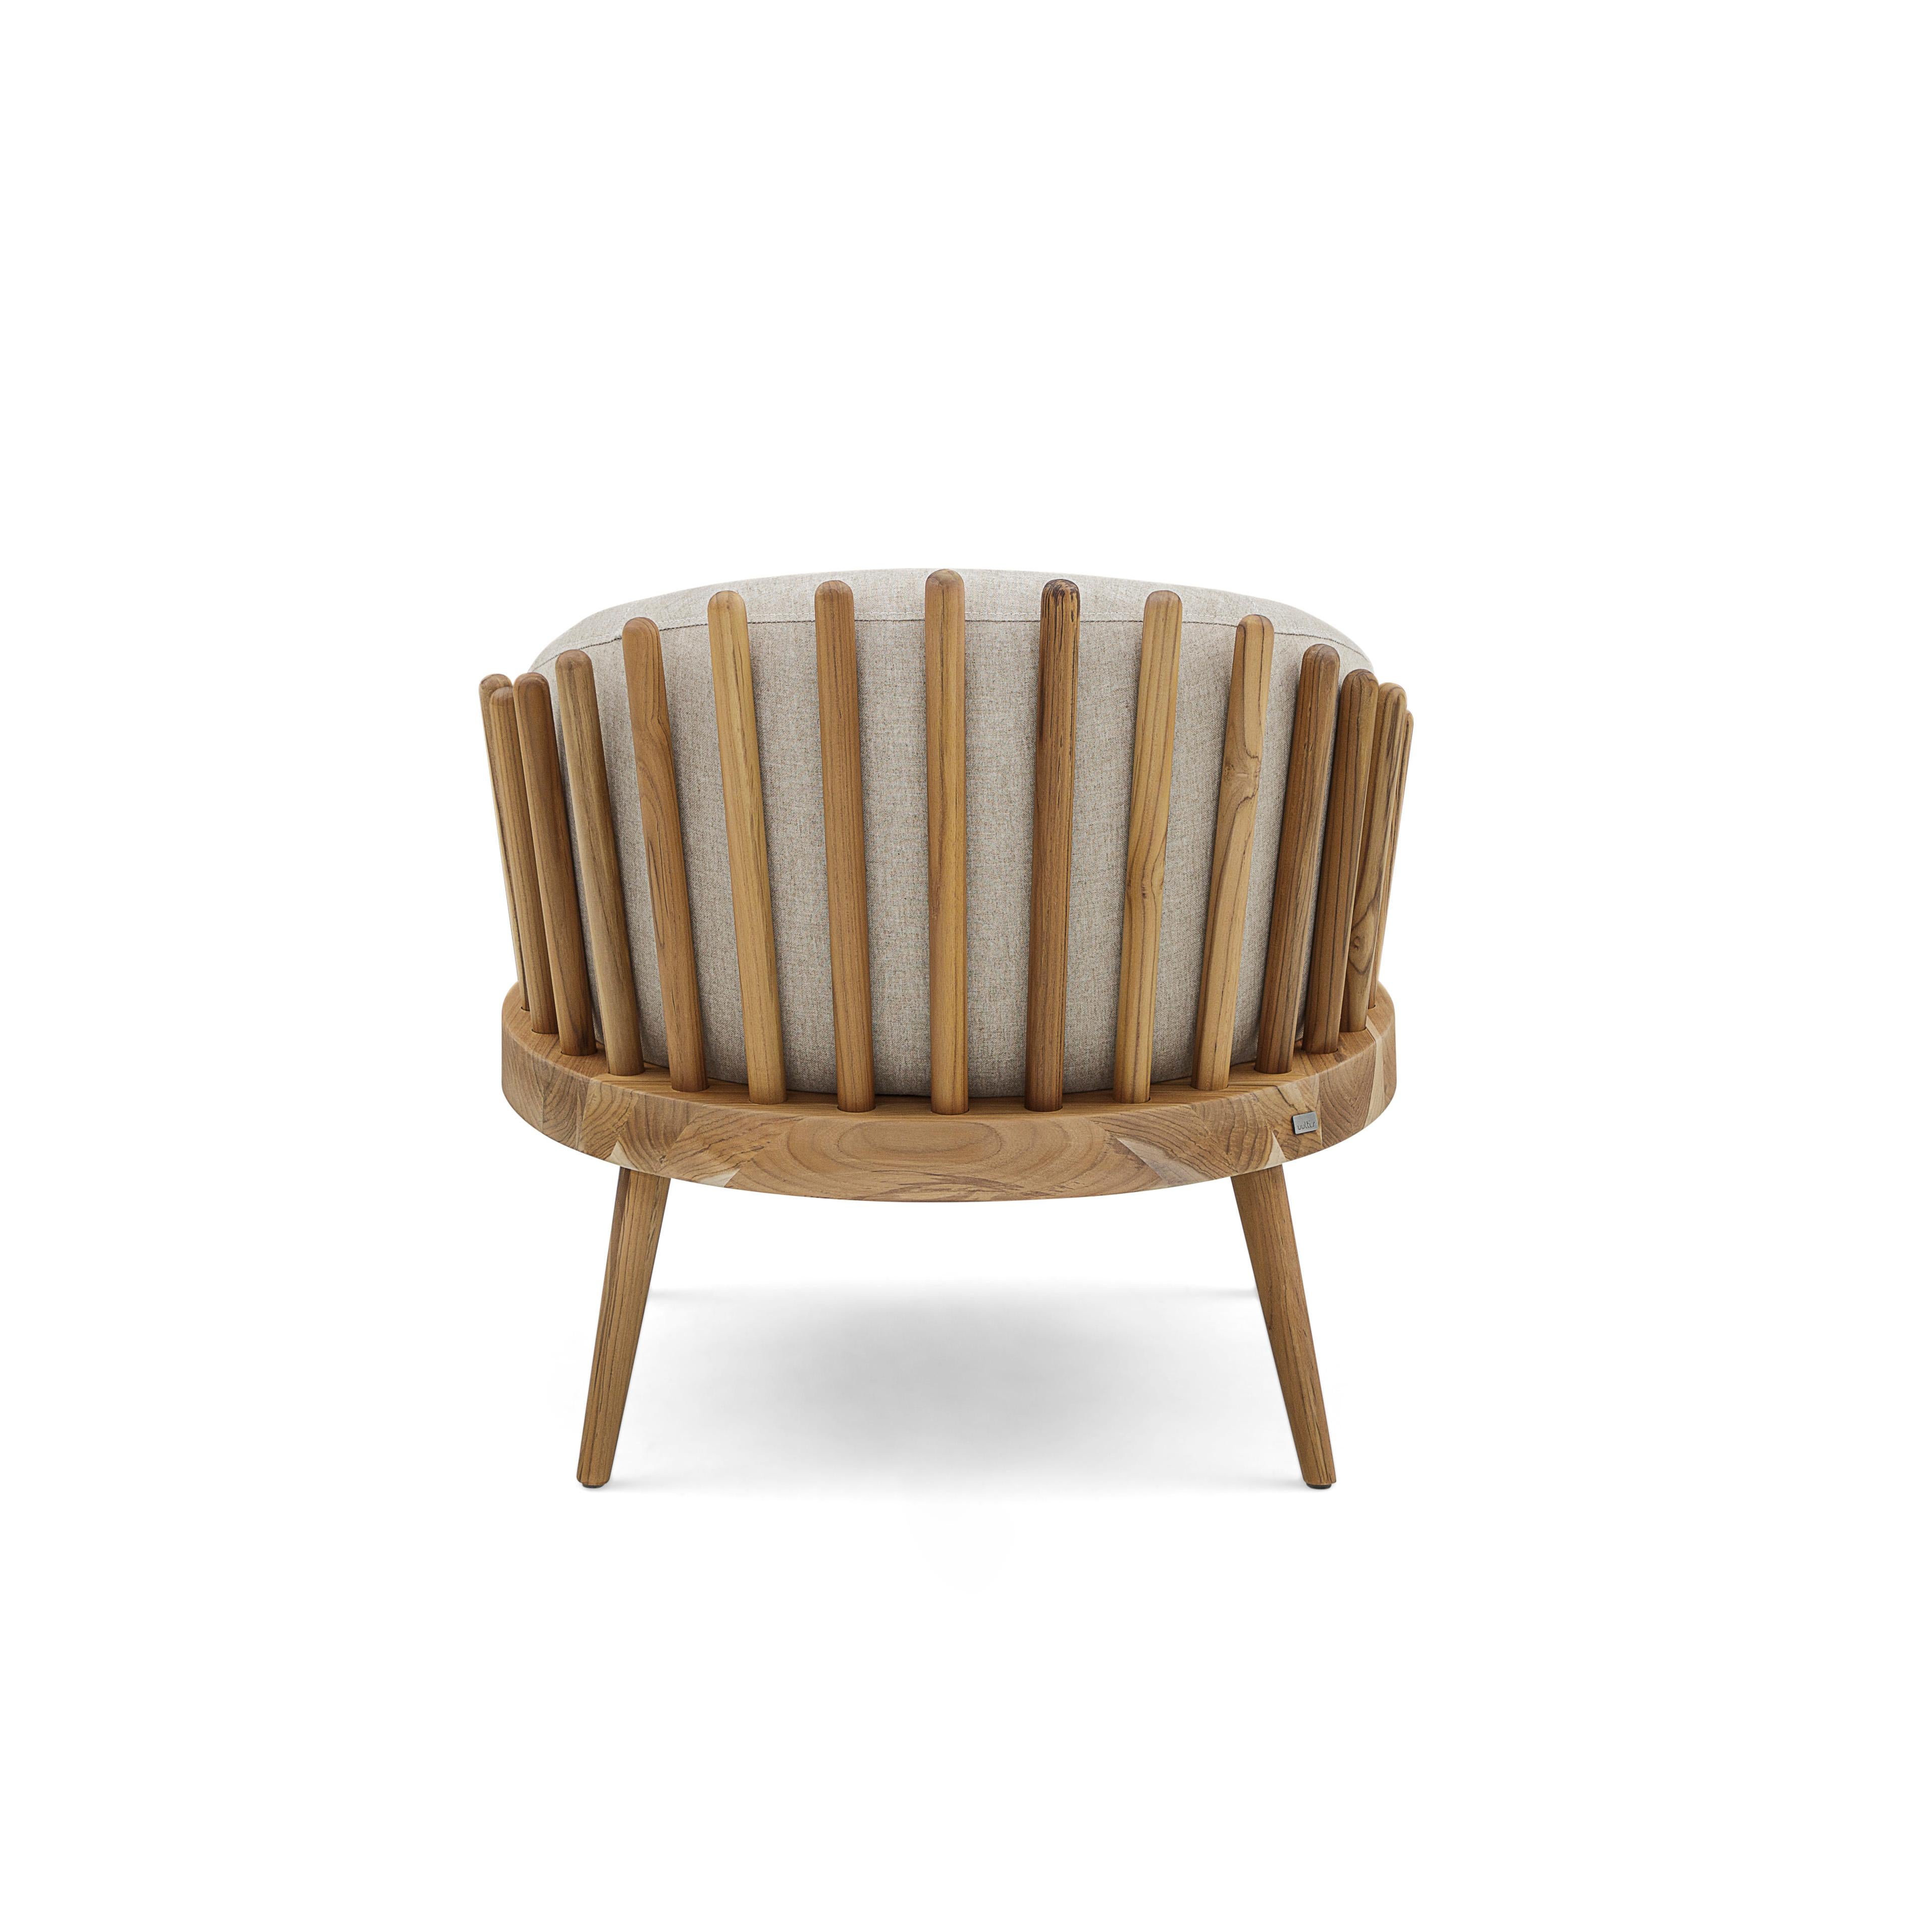 Contemporary Fane Upholstered Armchair in Teak Wood Finish and Beige Fabric For Sale